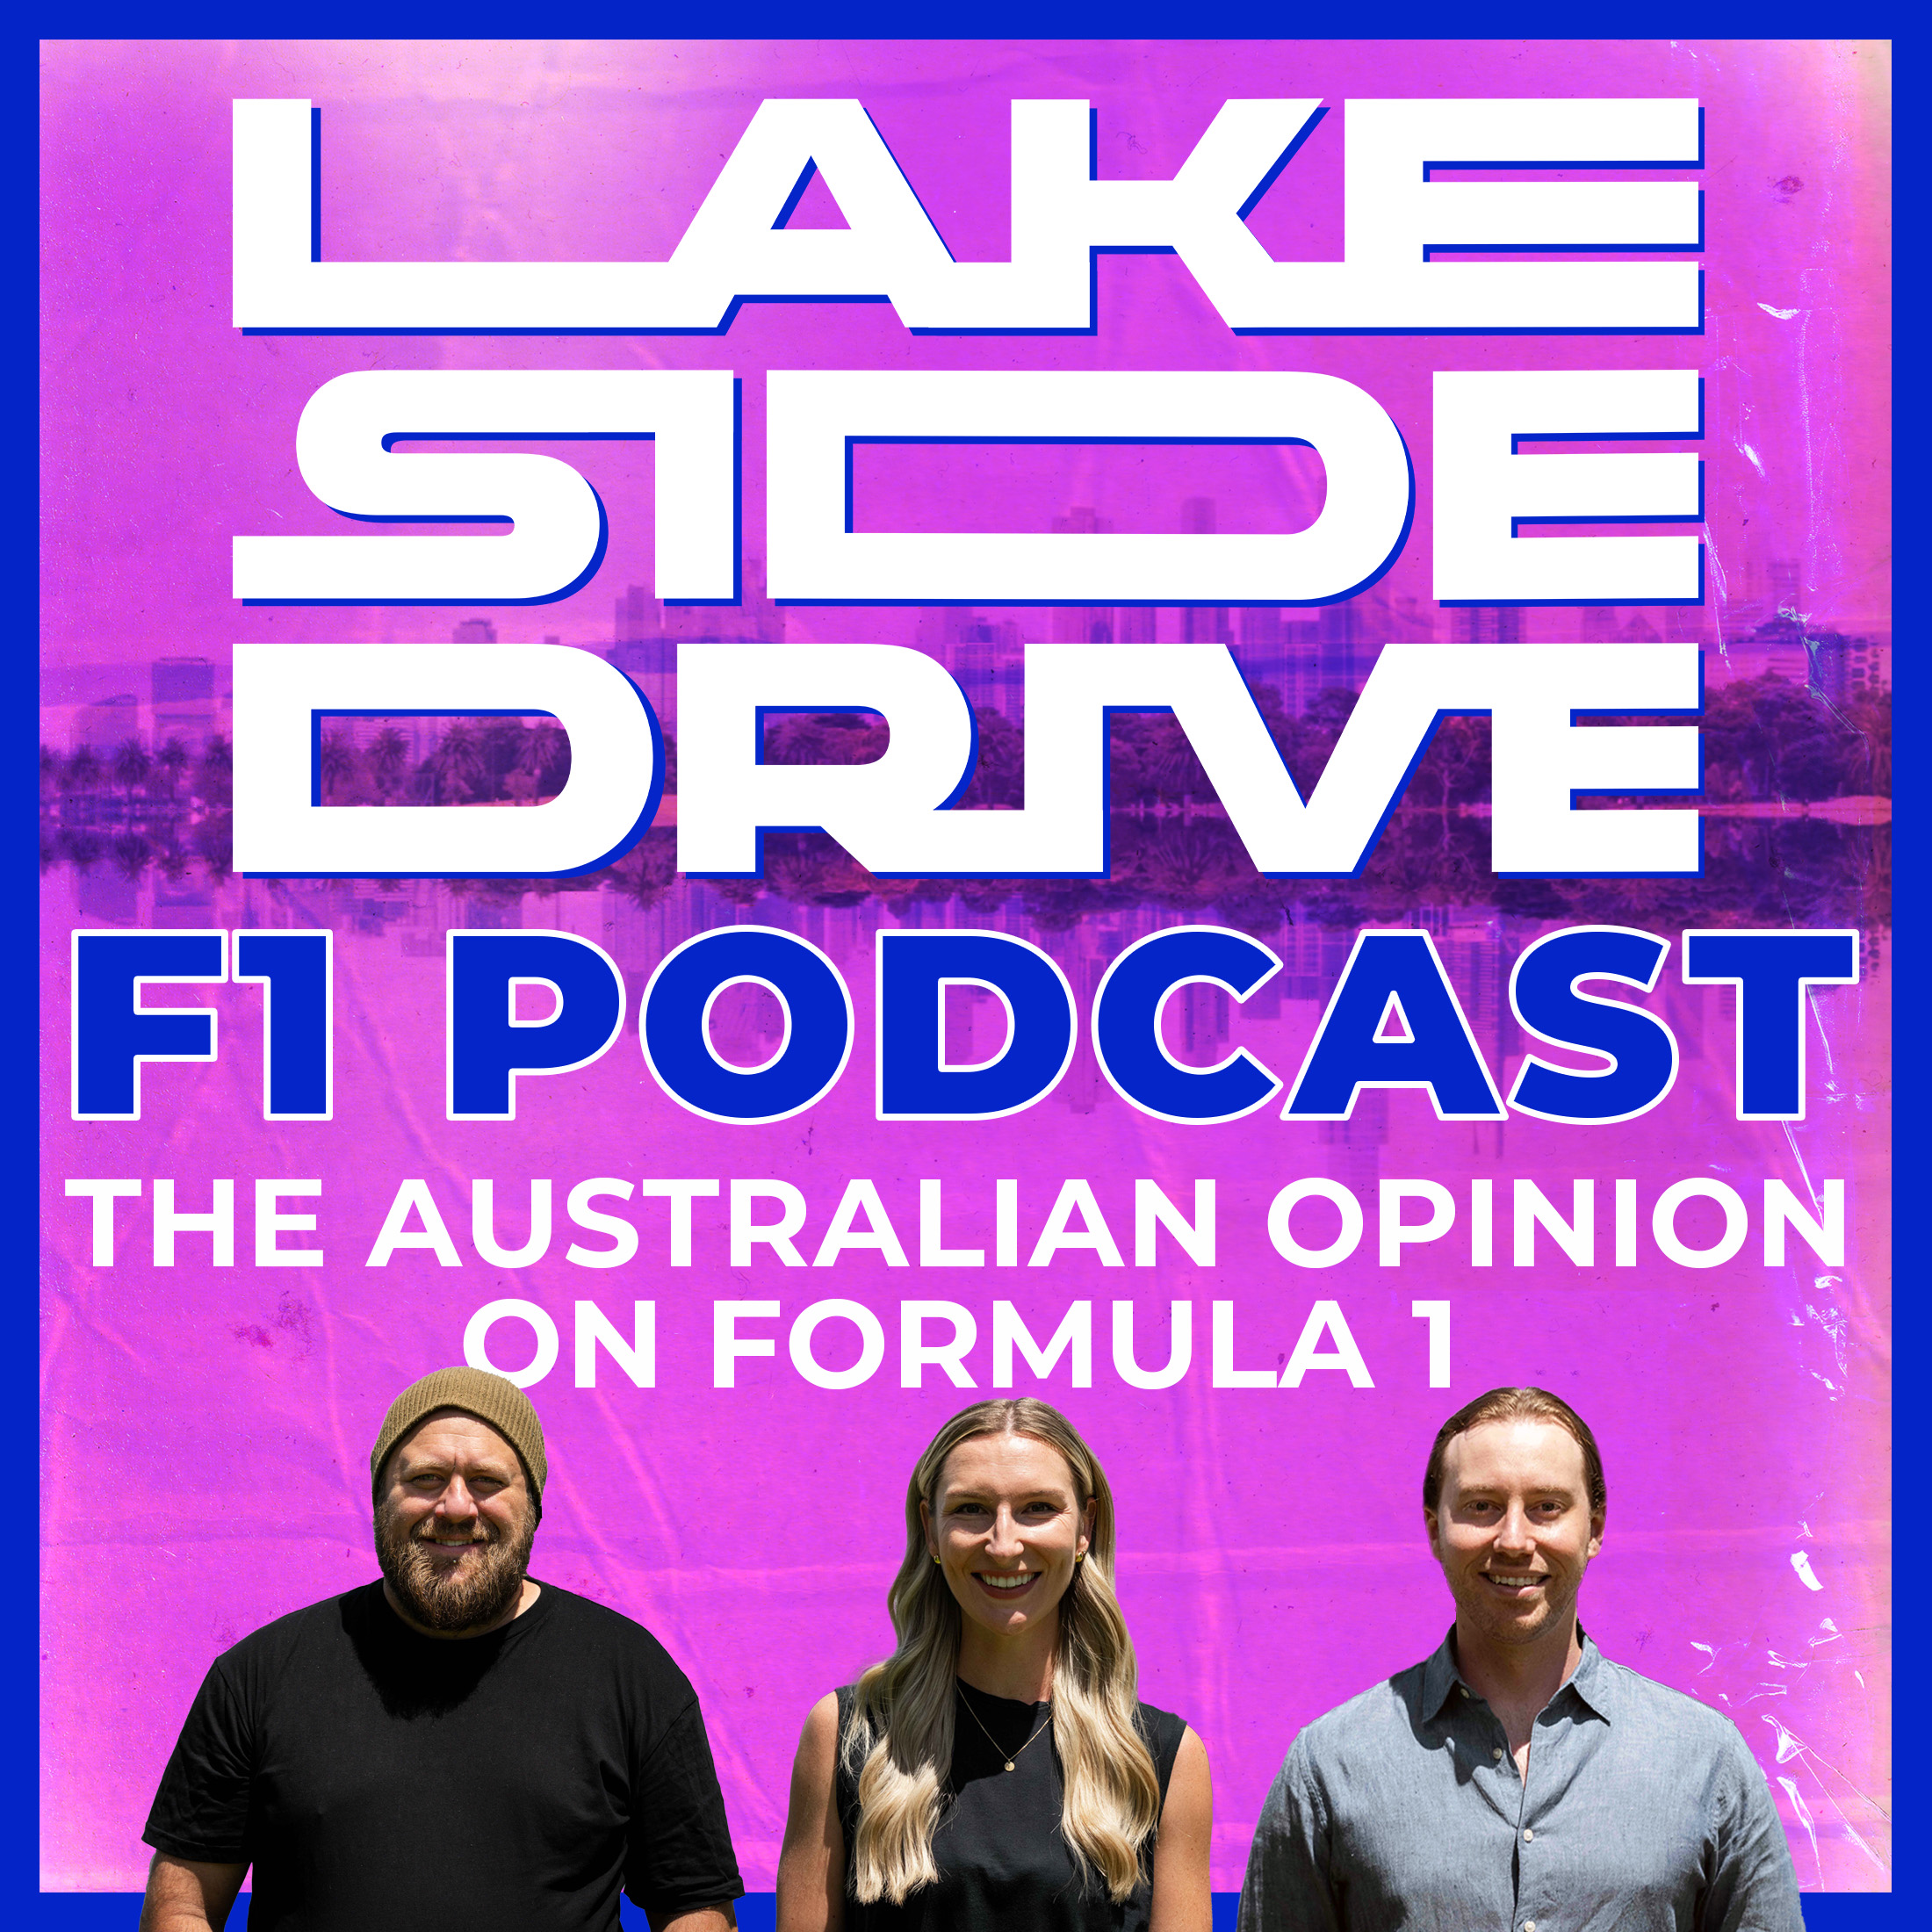 Podcast image for Lakeside Drive F1 Podcast